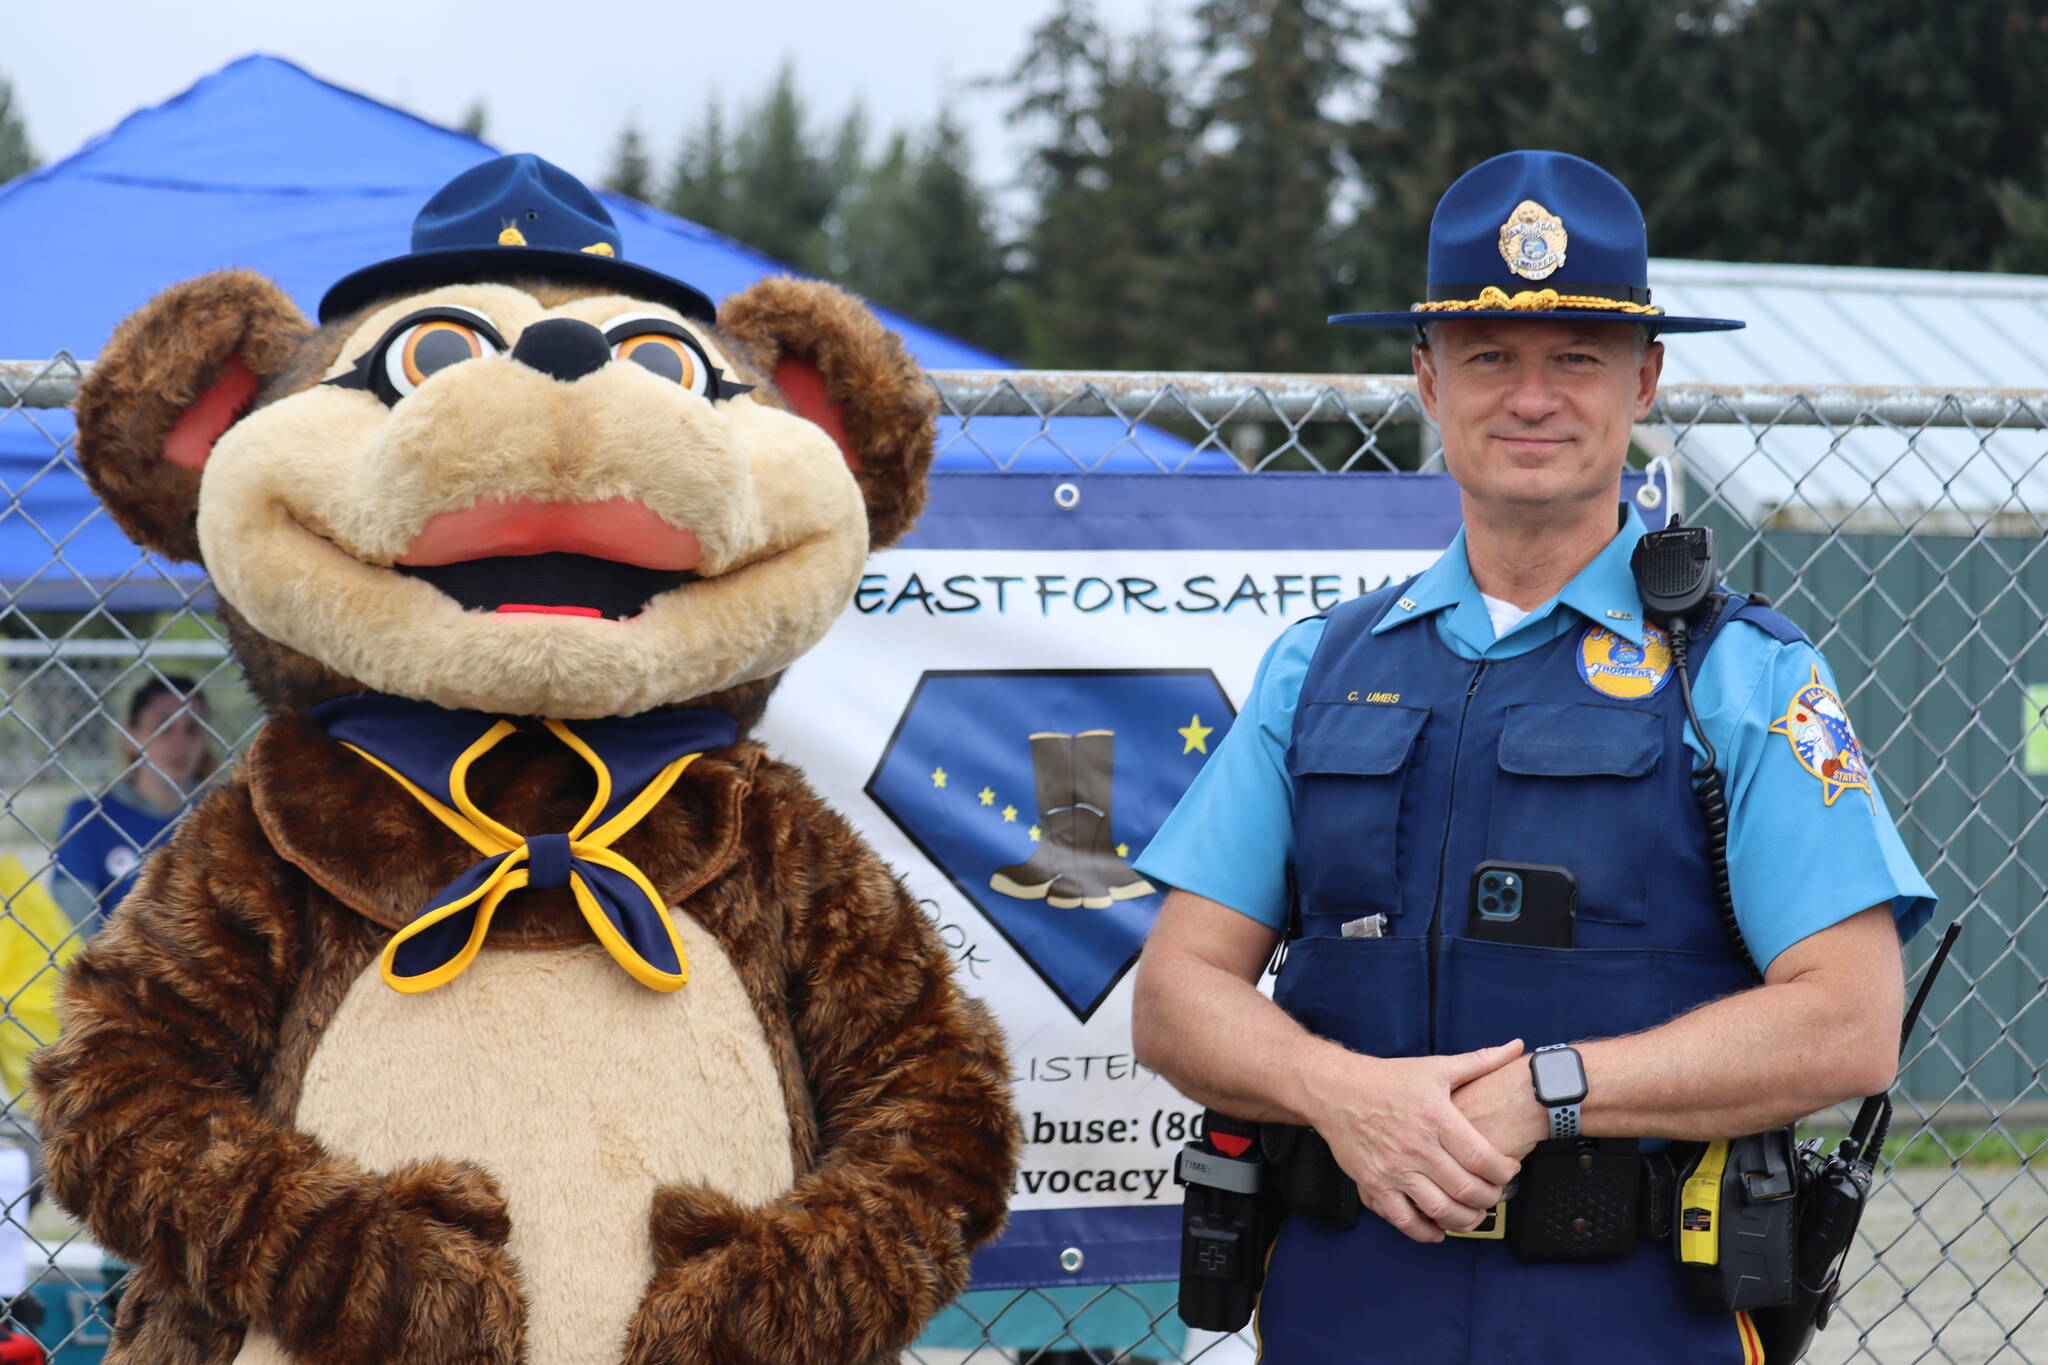 Officer Chris Umbs and Safety Bear were also in attendance for SAFE Advocacy’s first Family Day at the Park on Saturday. The Juneau Police Department is one of many organizations closely partnered with SAFE Child Advocacy Center to prevent child abuse and provide outreach and education to the community.(Jonson Kuhn / Juneau Empire)